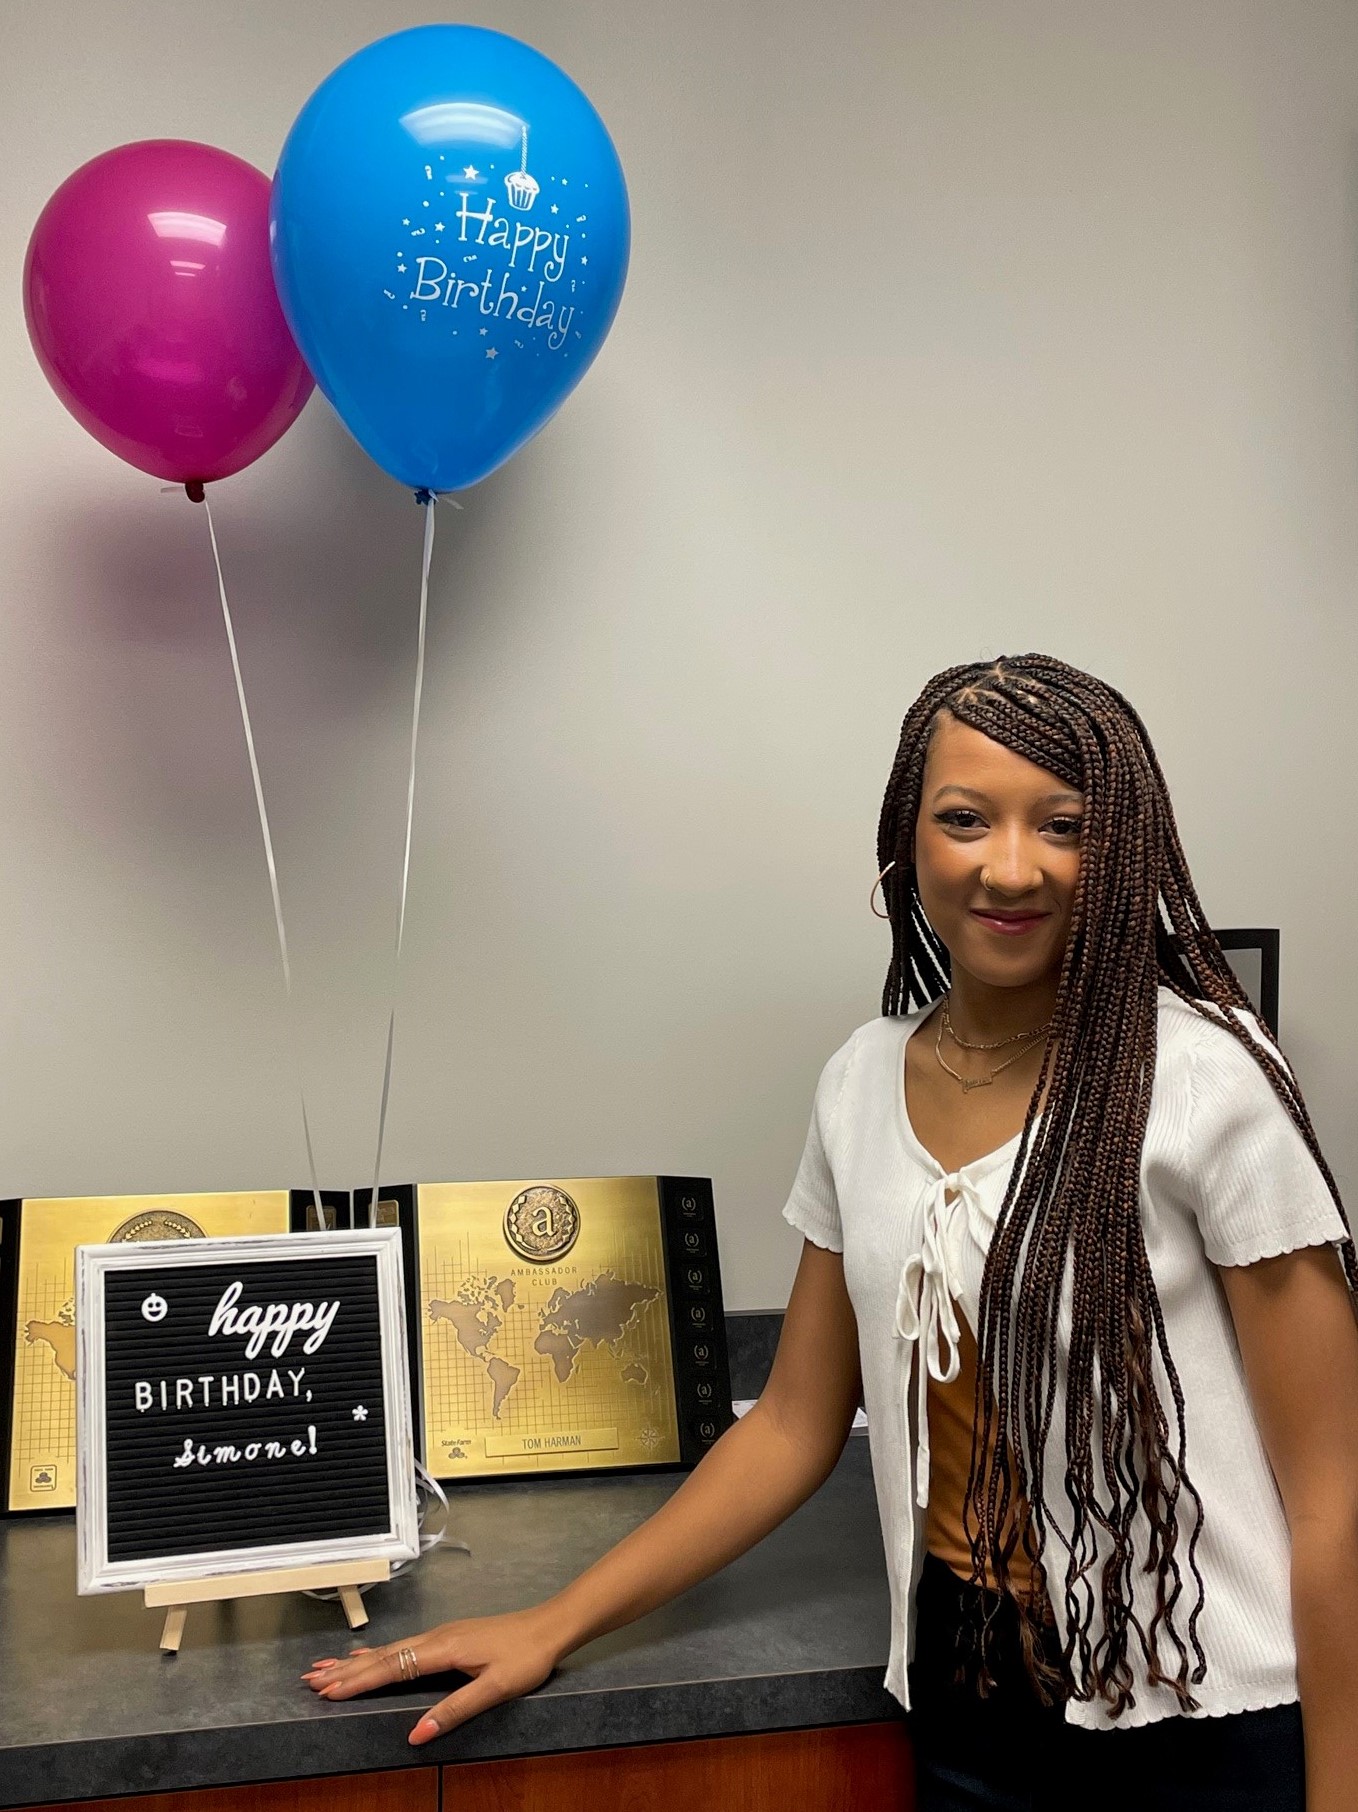 If you happen to see or talk to Simone Price today, be sure to wish her a happy birthday!  We hope you have a wonderful day, Simone!